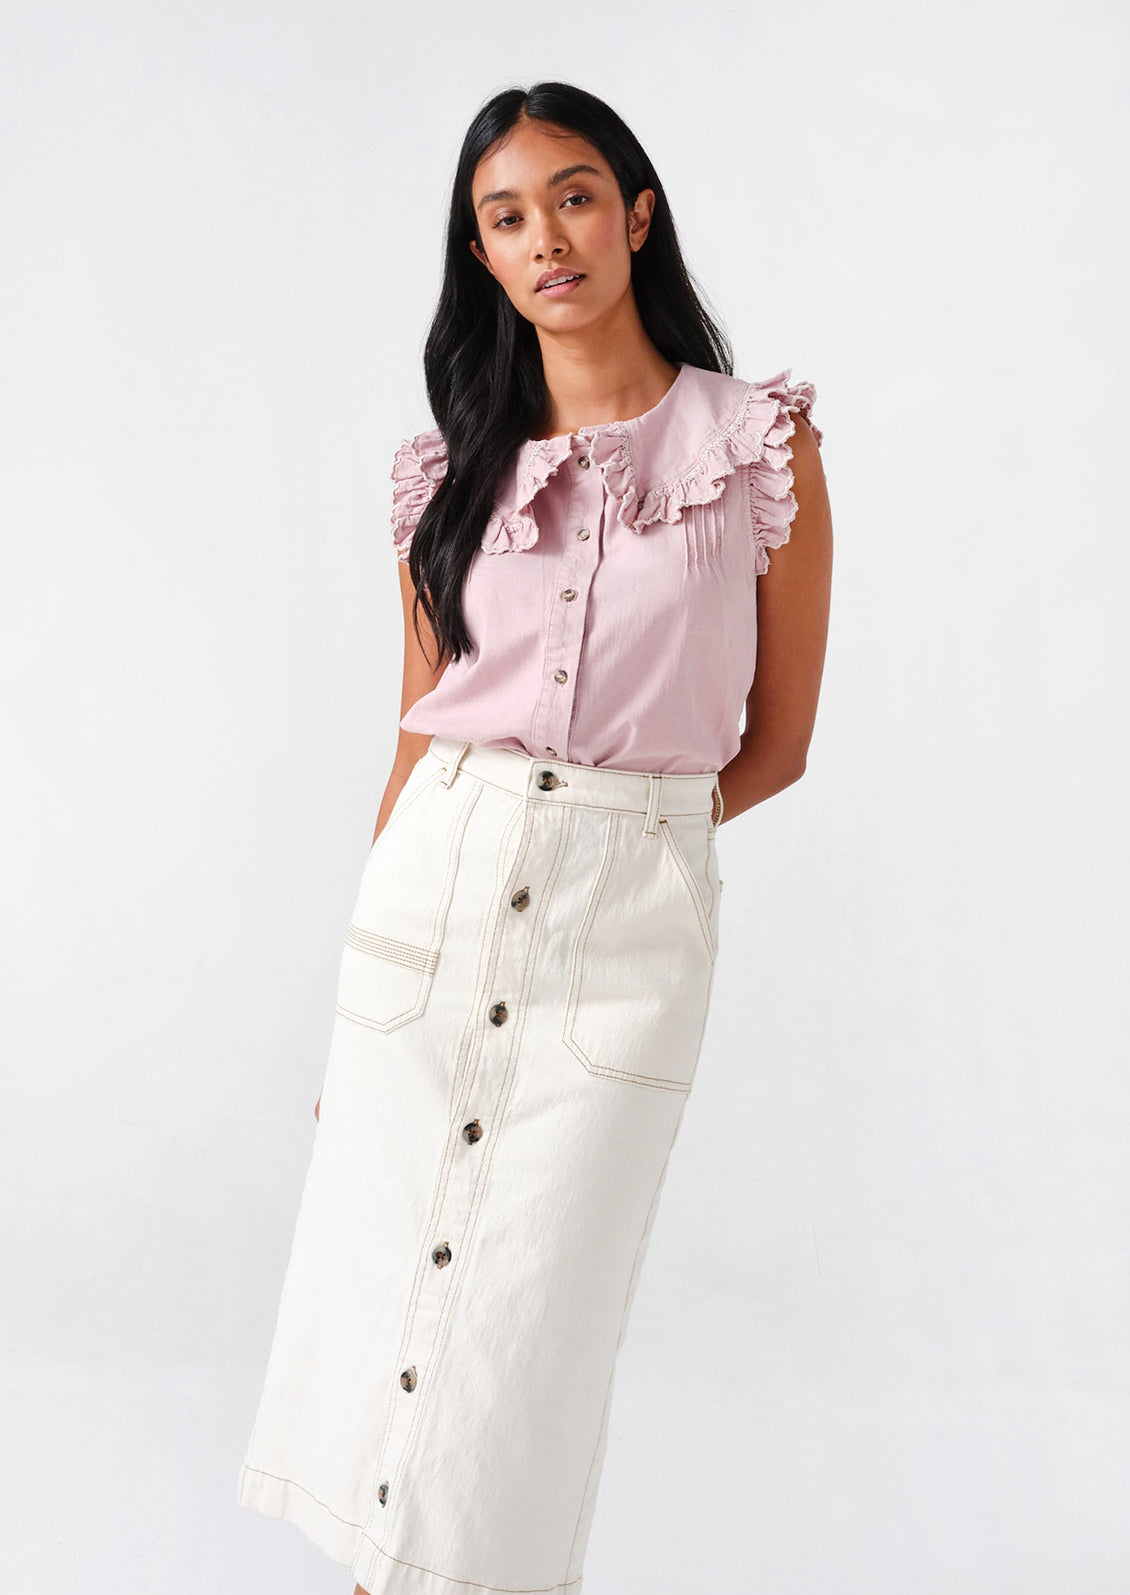 A woman in a white denim midi skirt and lilac top. 